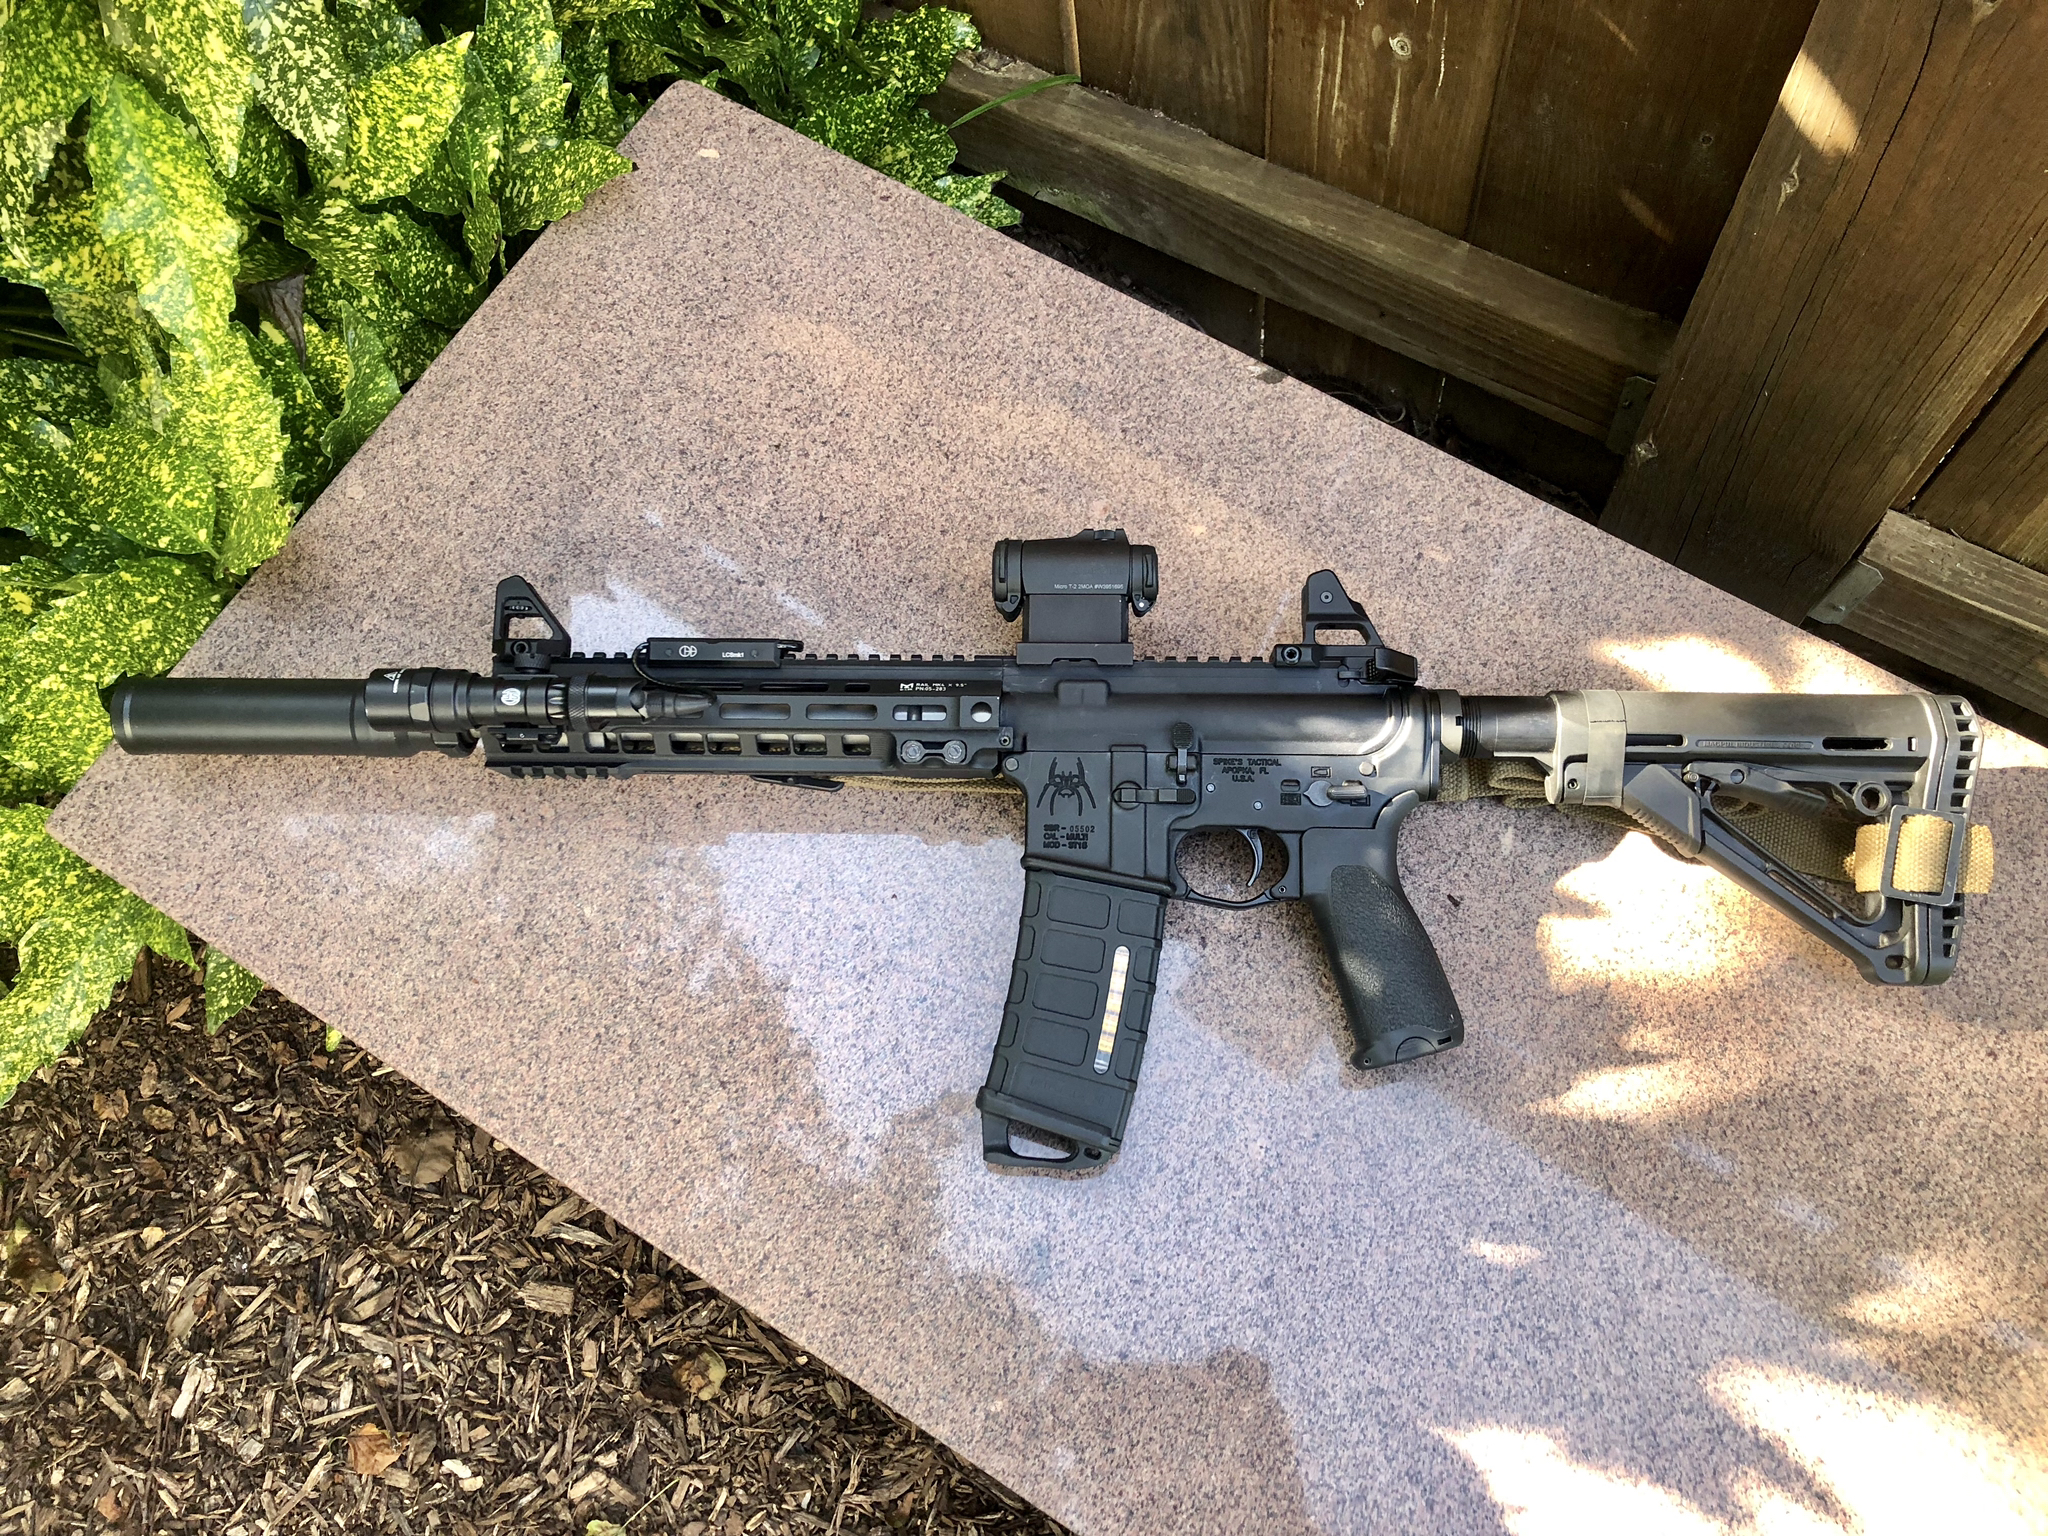 Official Geissele MK16 Picture Thread - Page 3 - AR15.COM